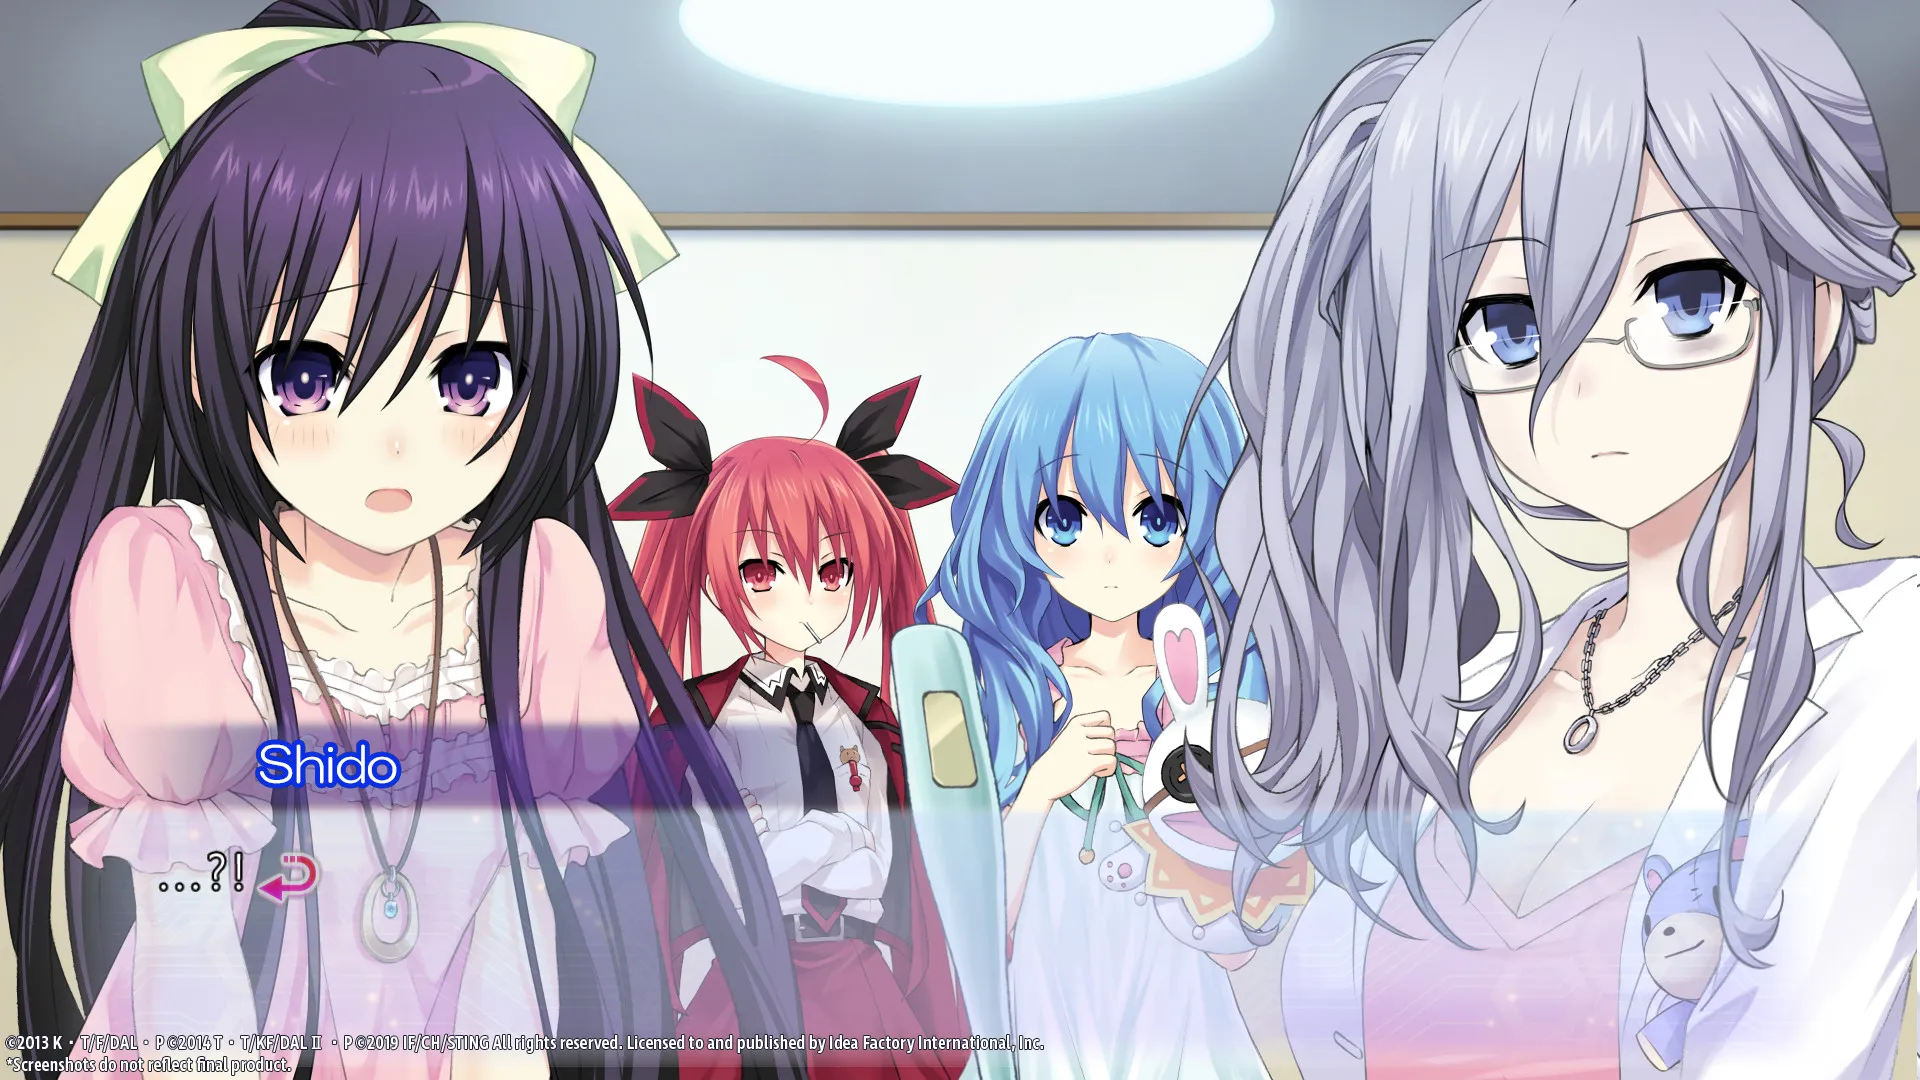 First Date A Live Light Novel Will Appear in English in February